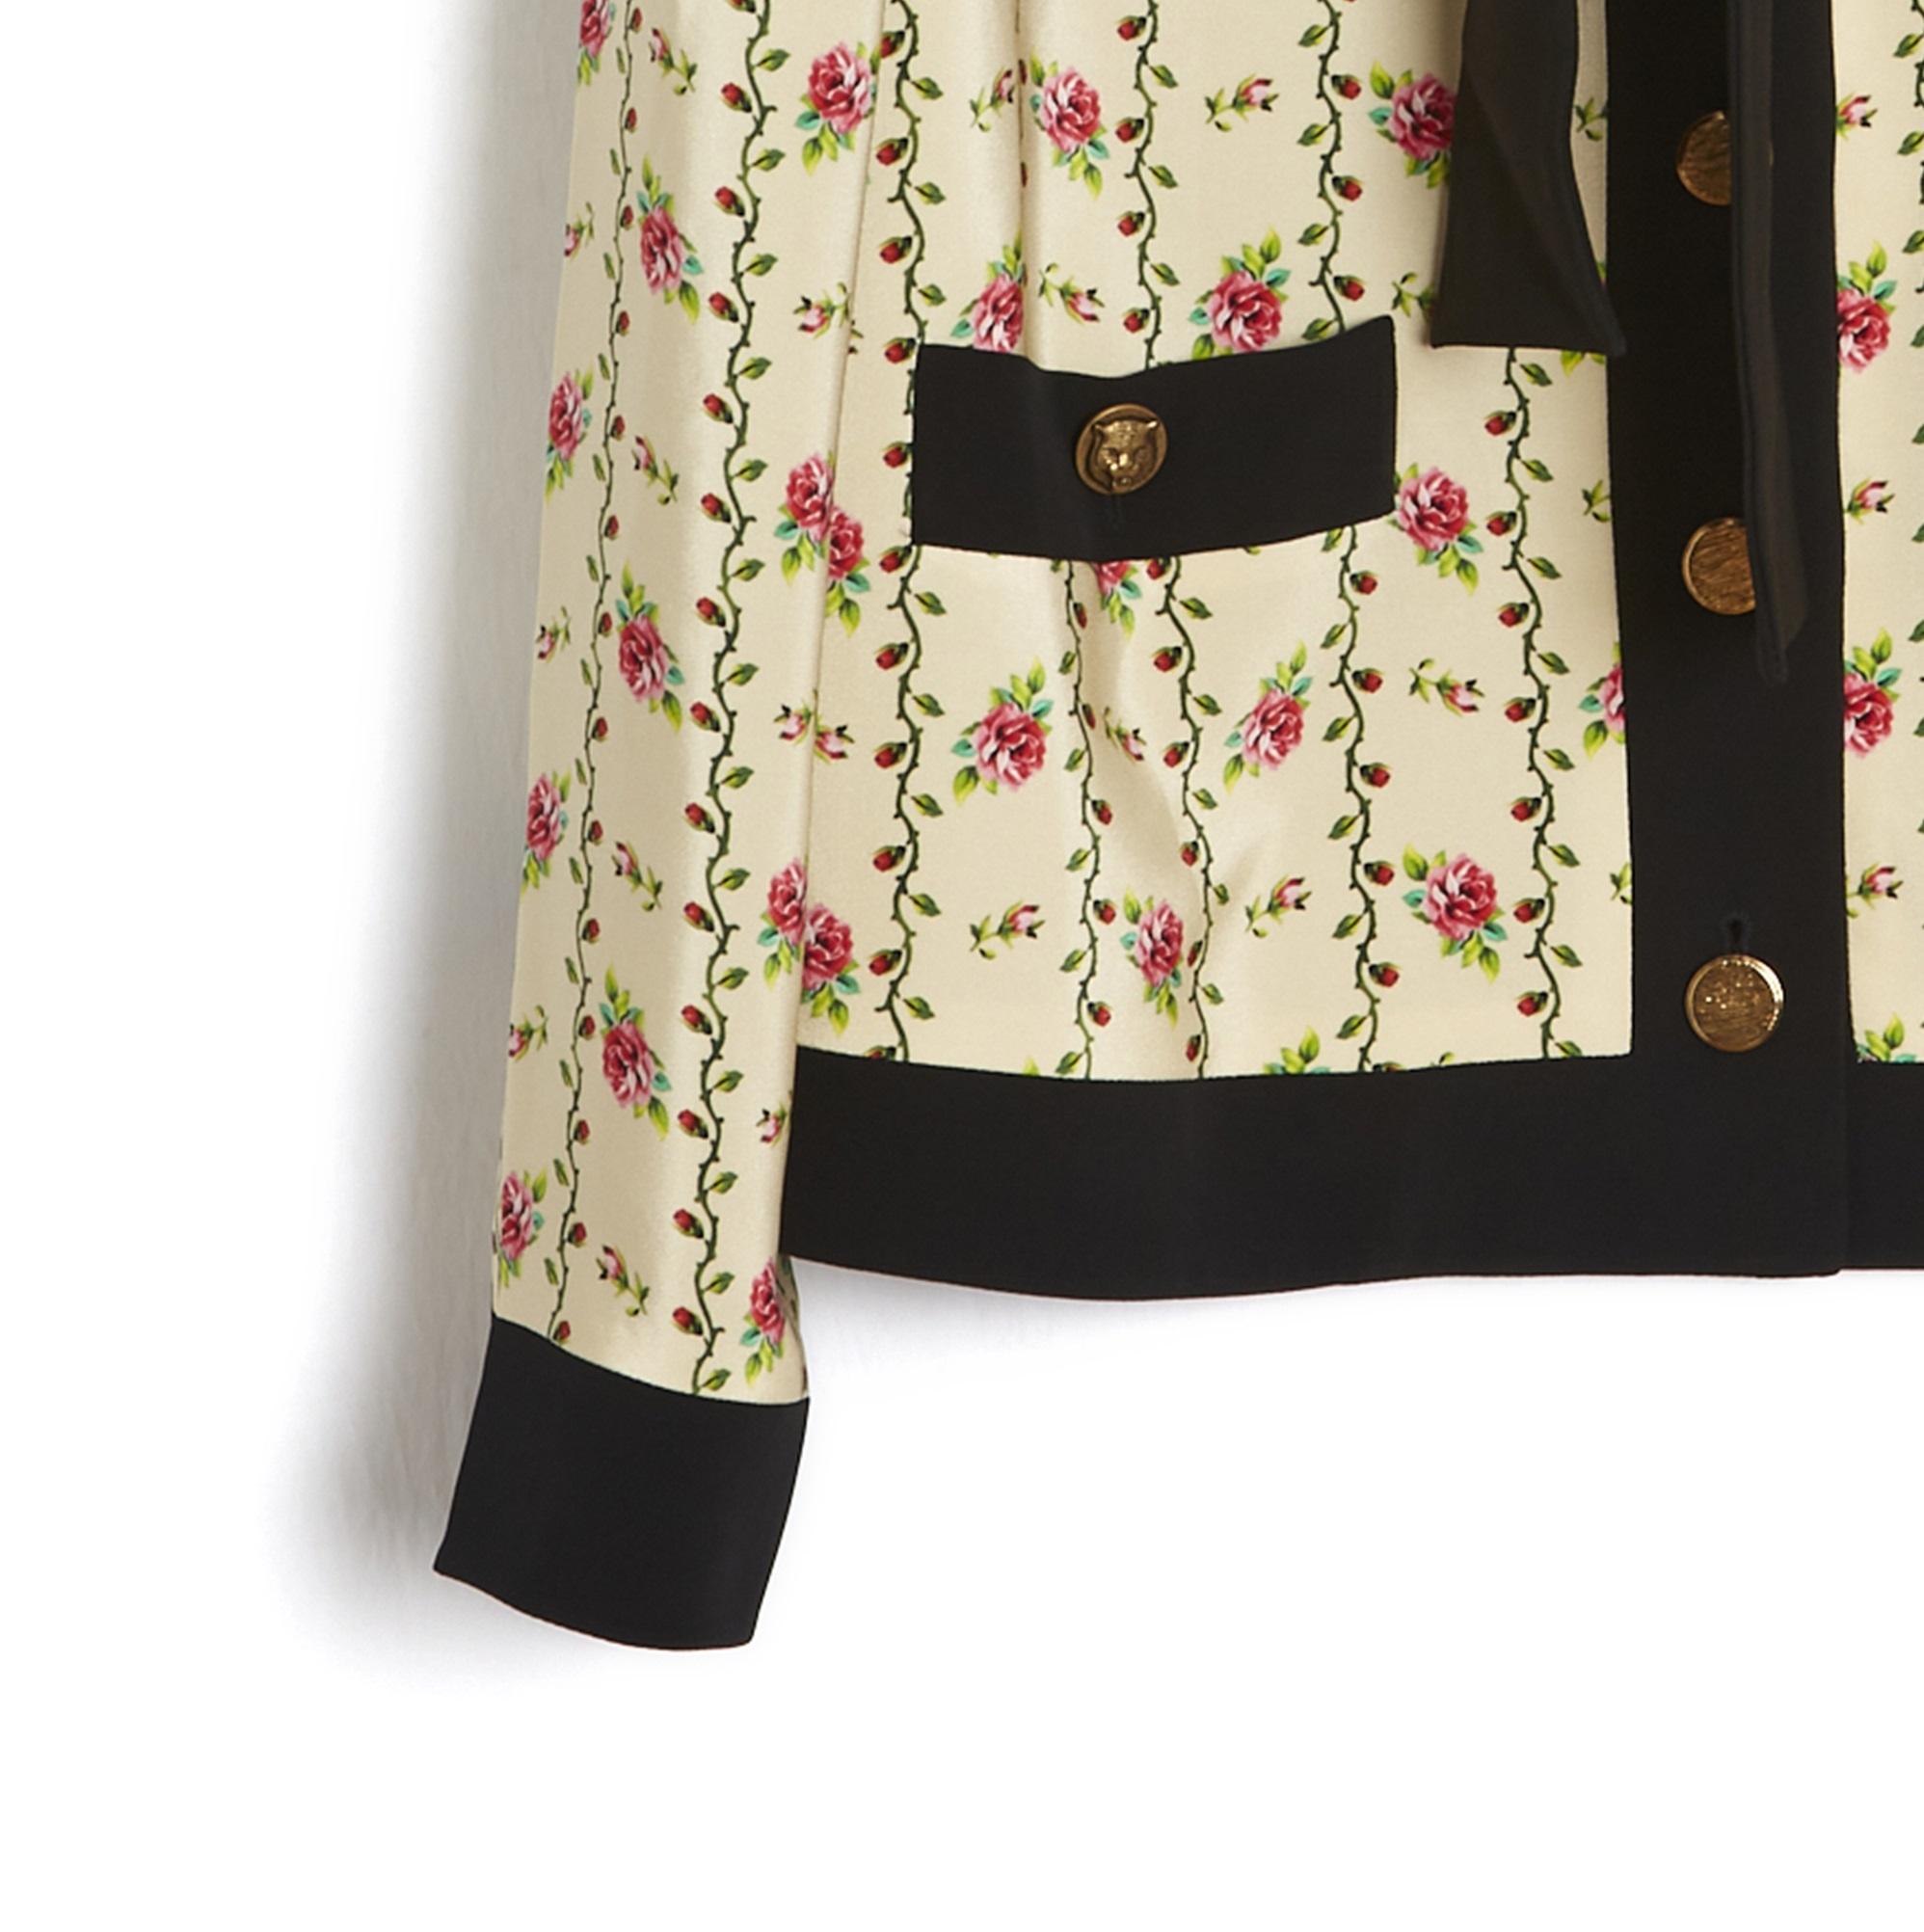 Gucci jacket from the Fall Winter 2018 collection in ecru silk crepe printed with a 